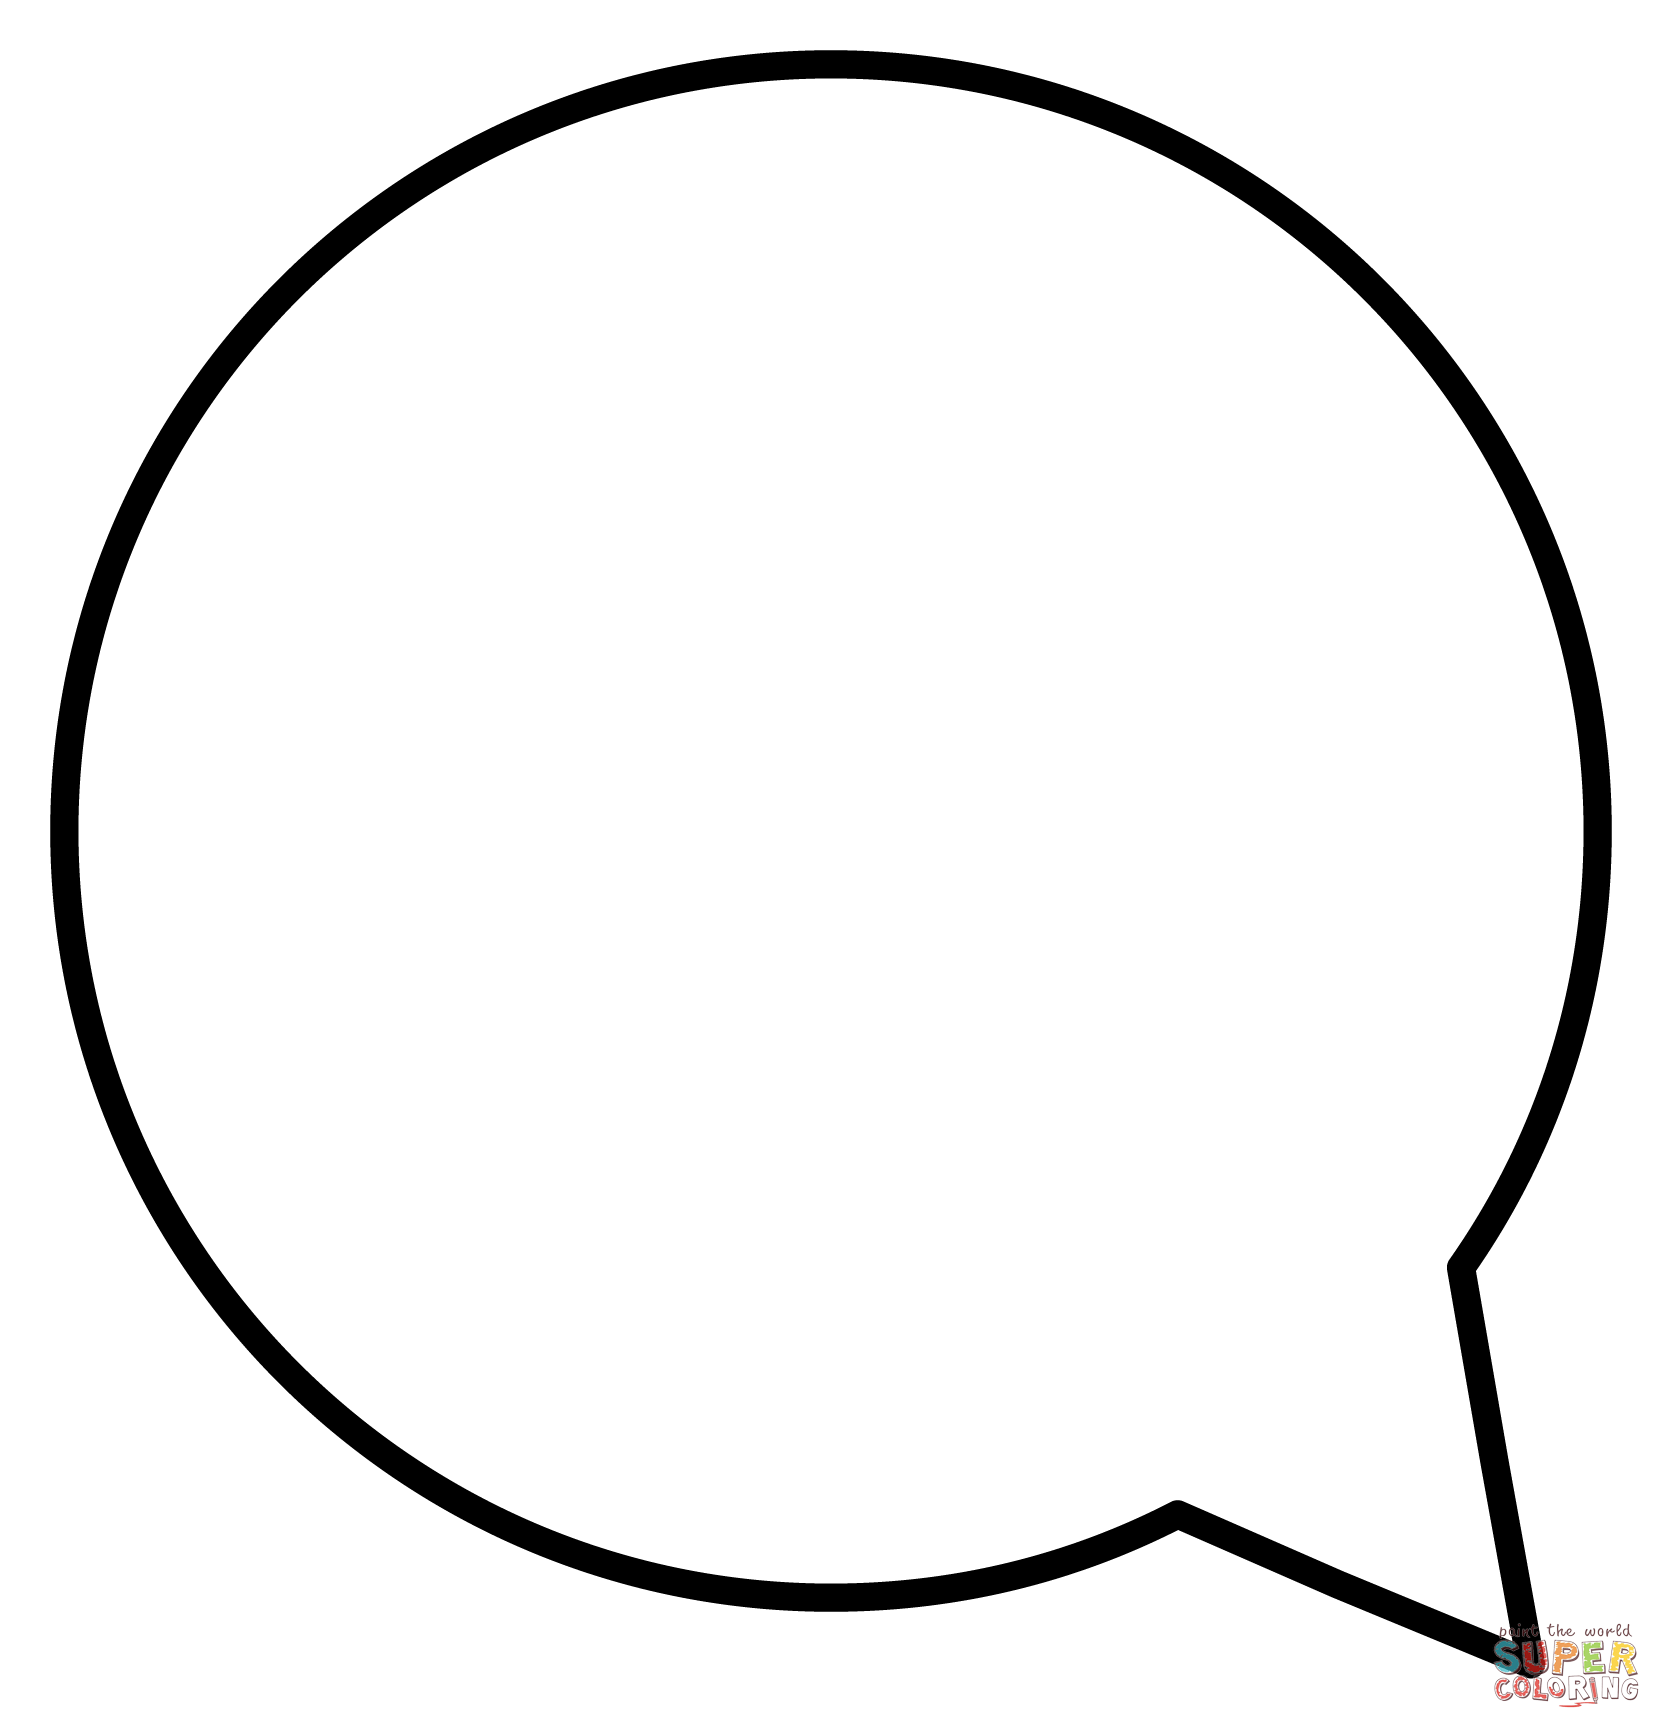 Left Speech Bubble Emoji coloring page | Free Printable Coloring Pages